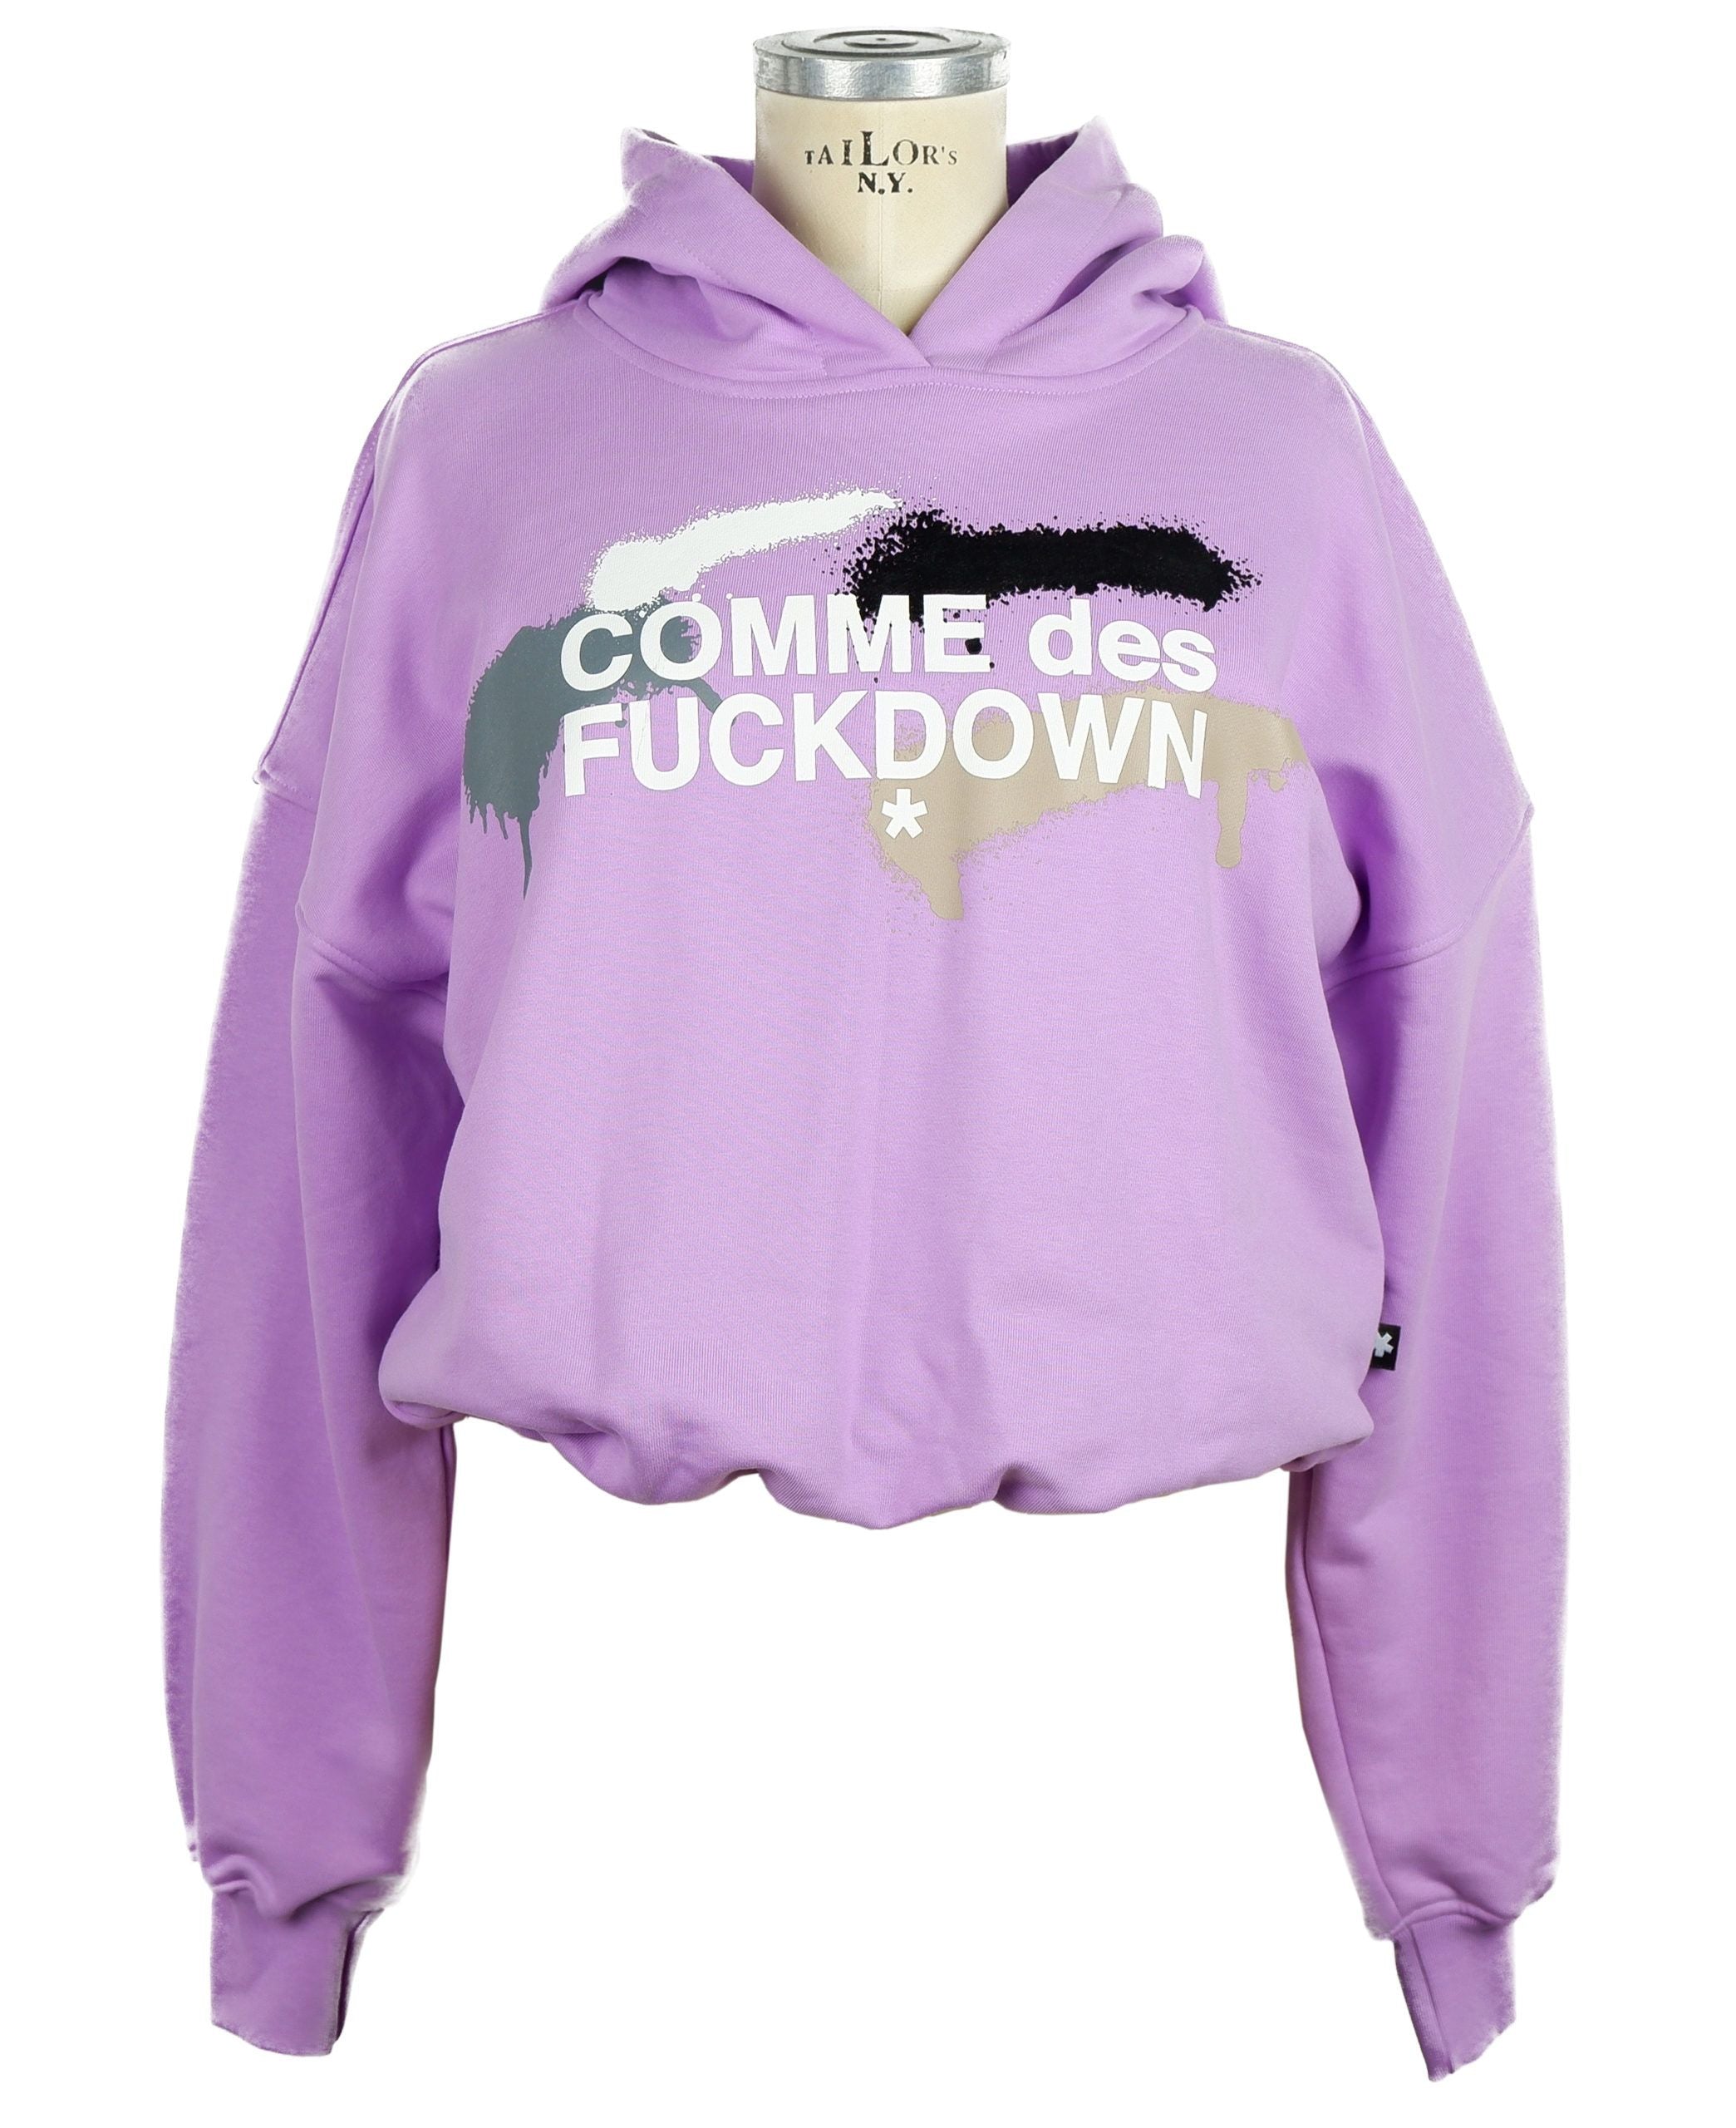 Comme Des Fuckdown Chic Purple Hooded Sweatshirt with Logo Print